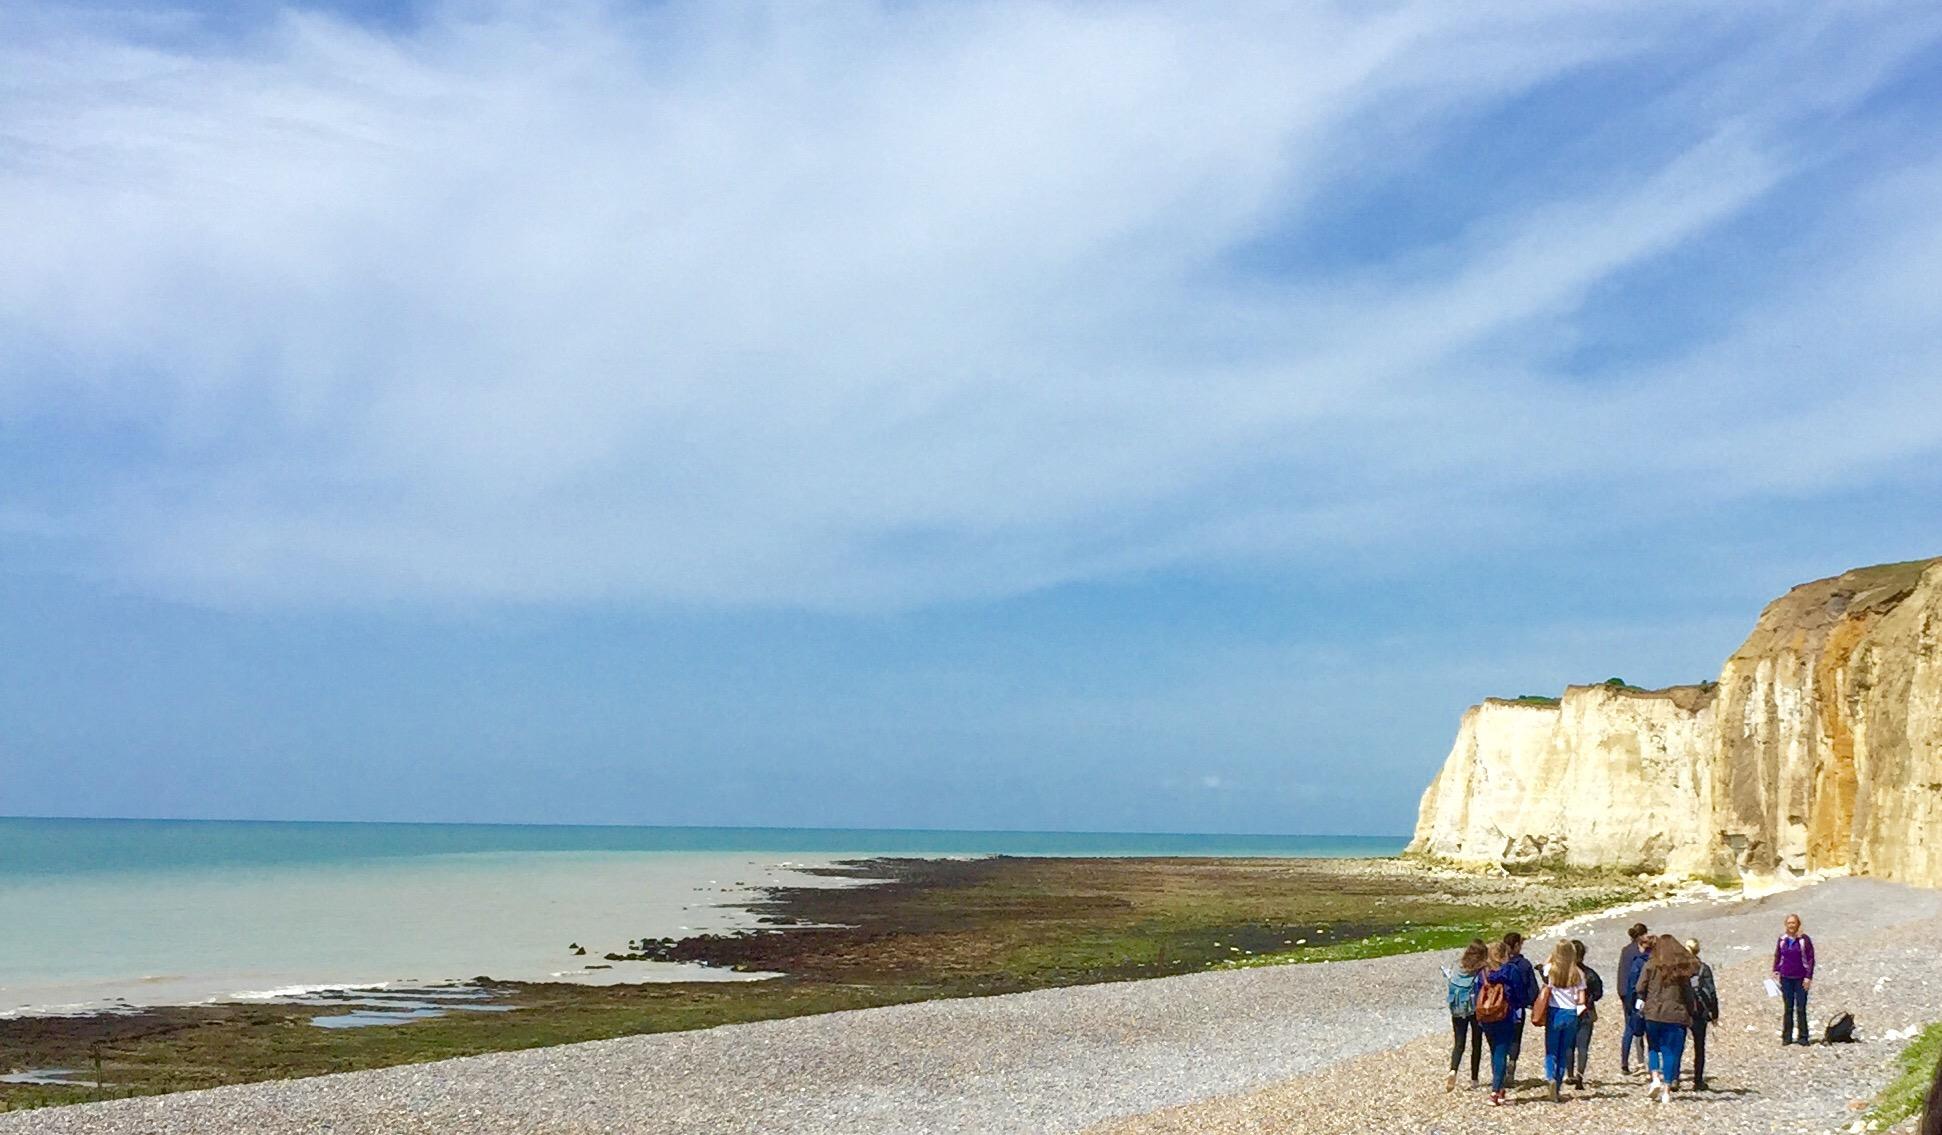 NEWHAVEN AND SEAFORD: Some students took a geography trip to Newhaven and Seaford to study the cliffs there and how the water affected the beaches of the town.